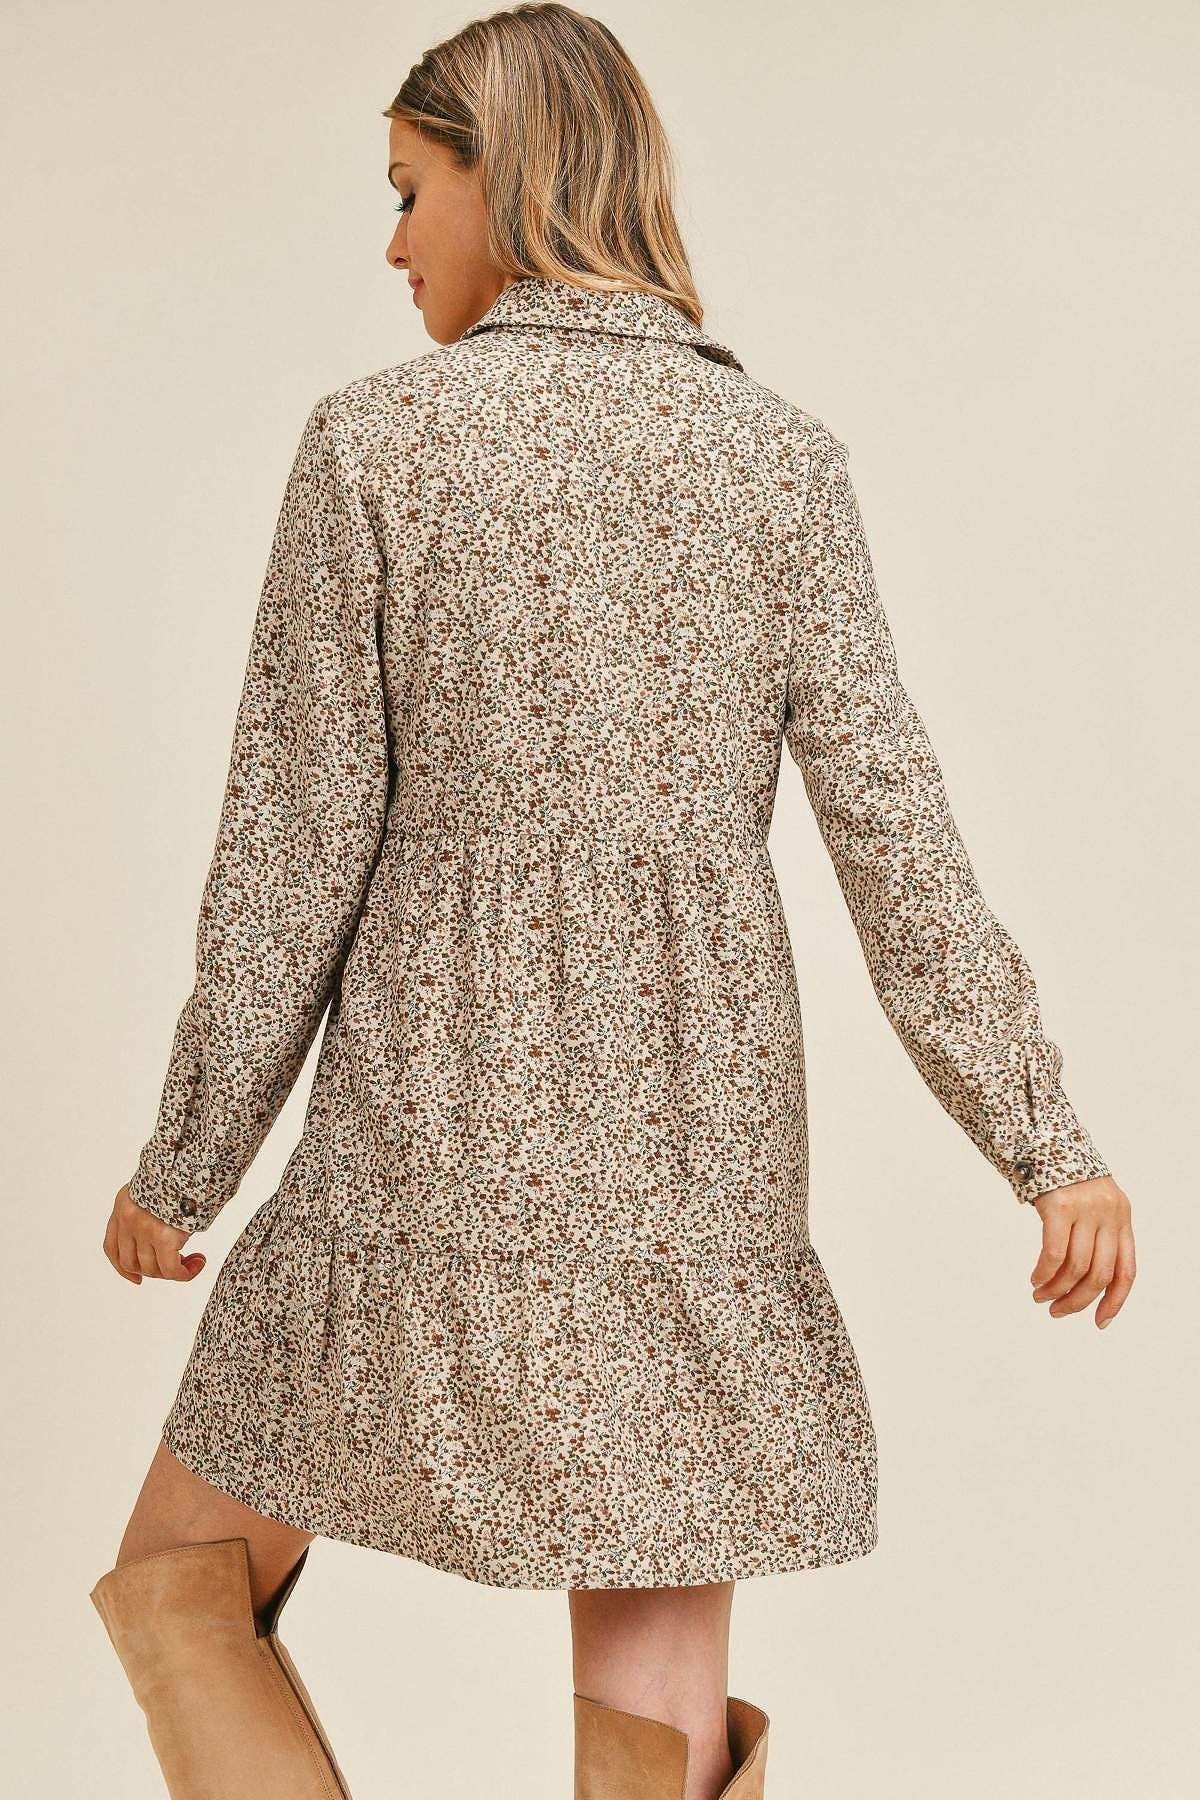 Corduroy Printed Button Down Front Collar Long Sleeve Dress